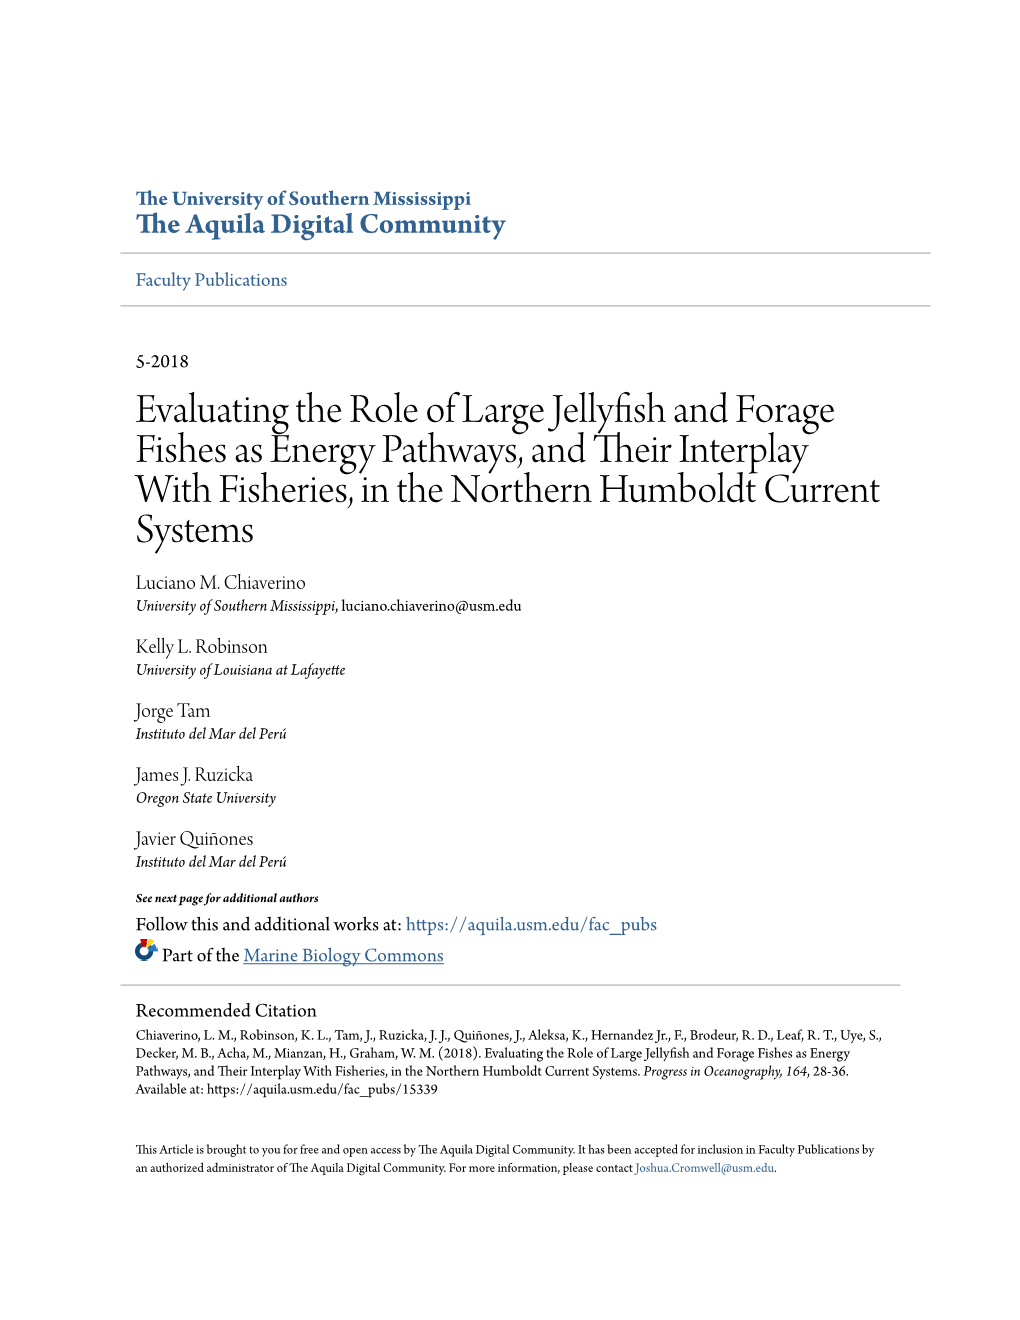 Evaluating the Role of Large Jellyfish and Forage Fishes As Energy Pathways, and Their Ni Terplay with Fisheries, in the Northern Humboldt Current Systems Luciano M